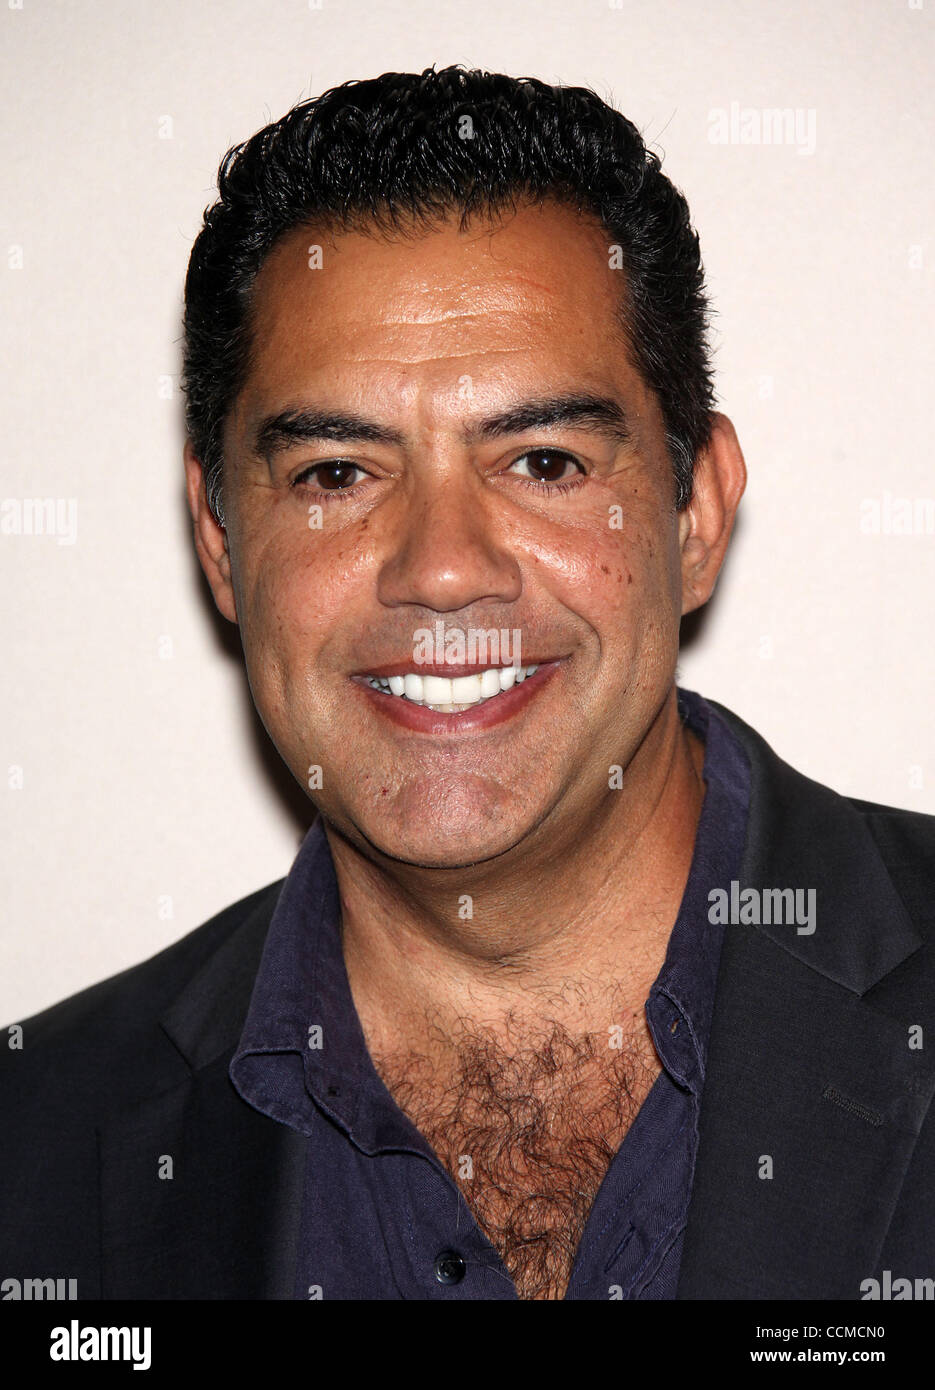 Nov 1, 2010 - North Hollywood, California, USA - Actor CARLOS GOMEZ  arriving to the Academy of Television & Sciences presents ''Primetime TV  Crimefighters'' held at the Leonard Goldenson Theatre. (Credit Image: ©